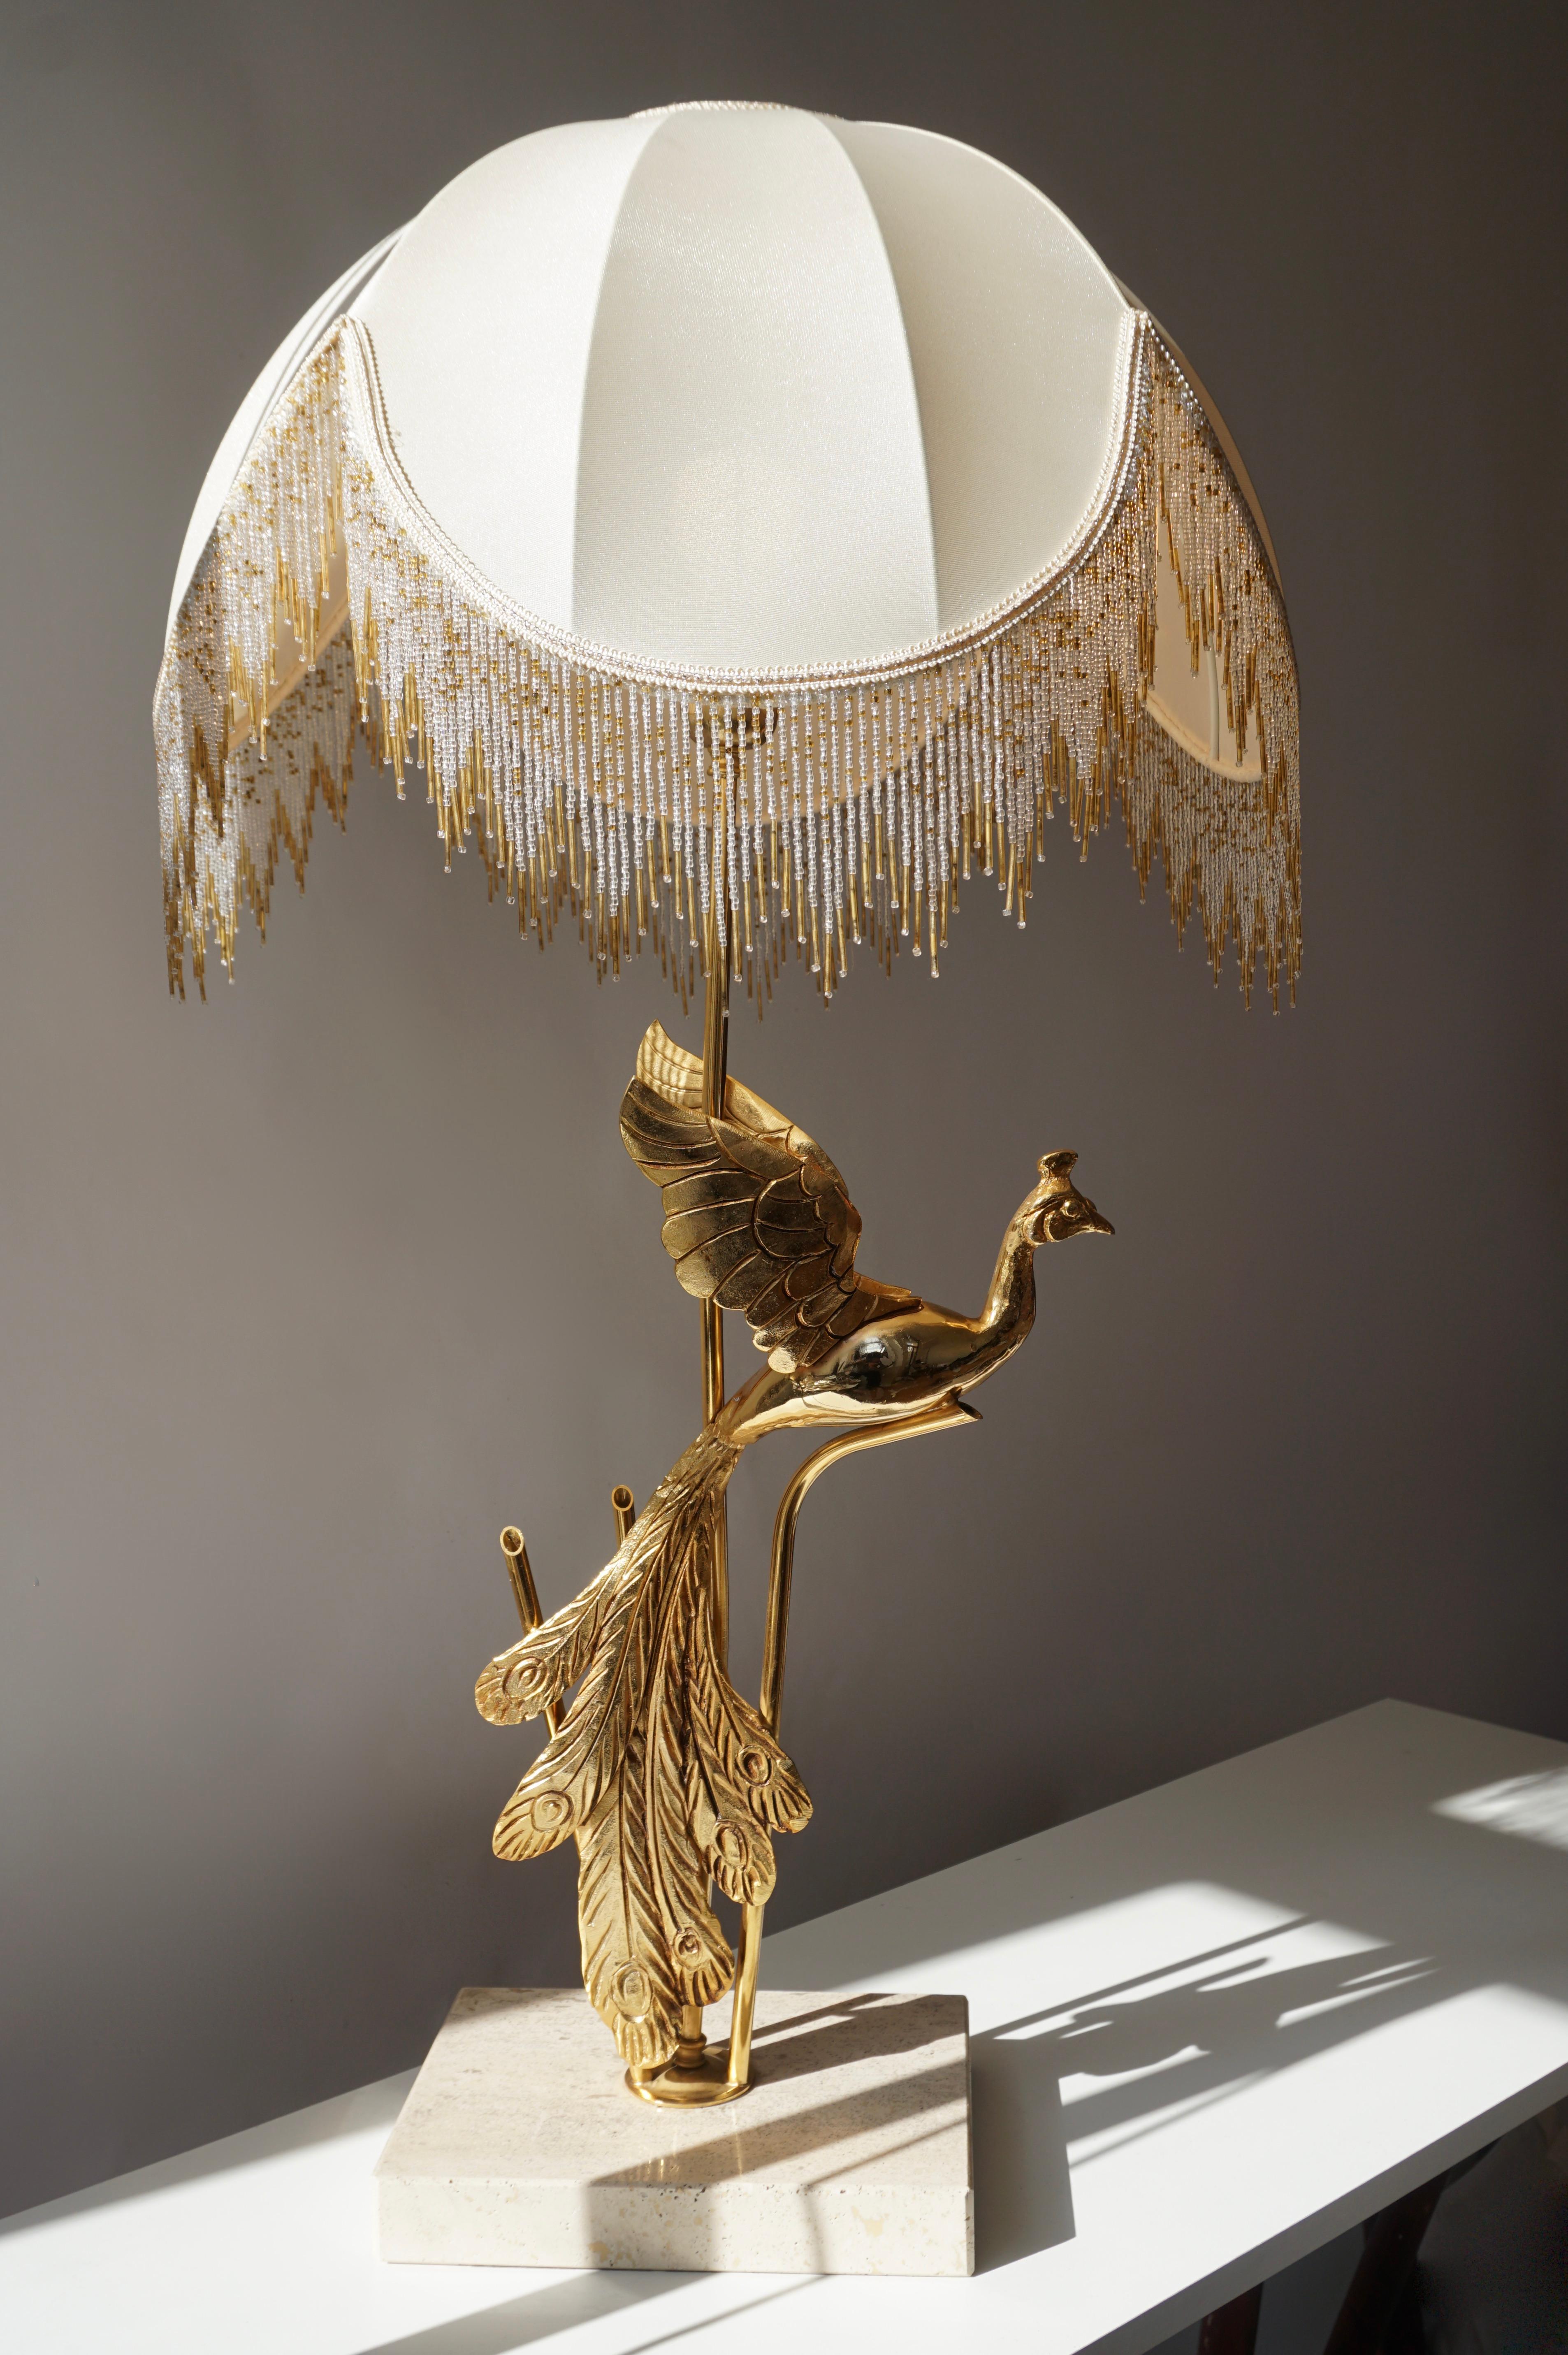 A truly eye-catching, unusual gilt metal table or floor lamp, fashioned in the shape of a Peacock. Designed in the style of Maison Jansen and produced circa 1970s in Italy. The Peacock has a beautiful original Patina and the lamp is in good